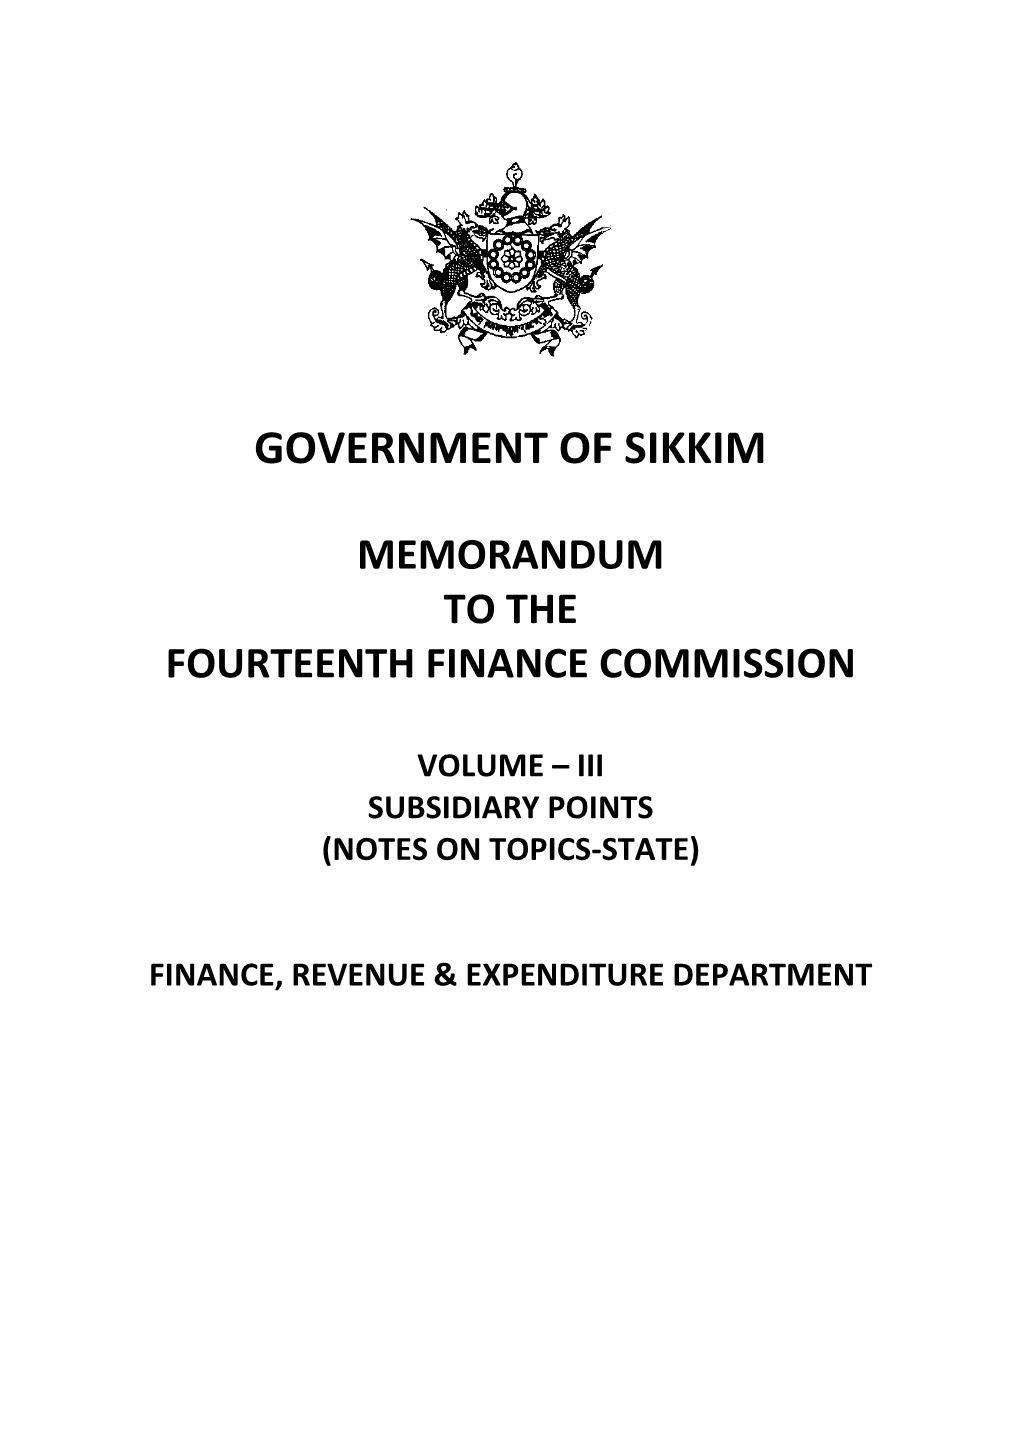 Government of Sikkim